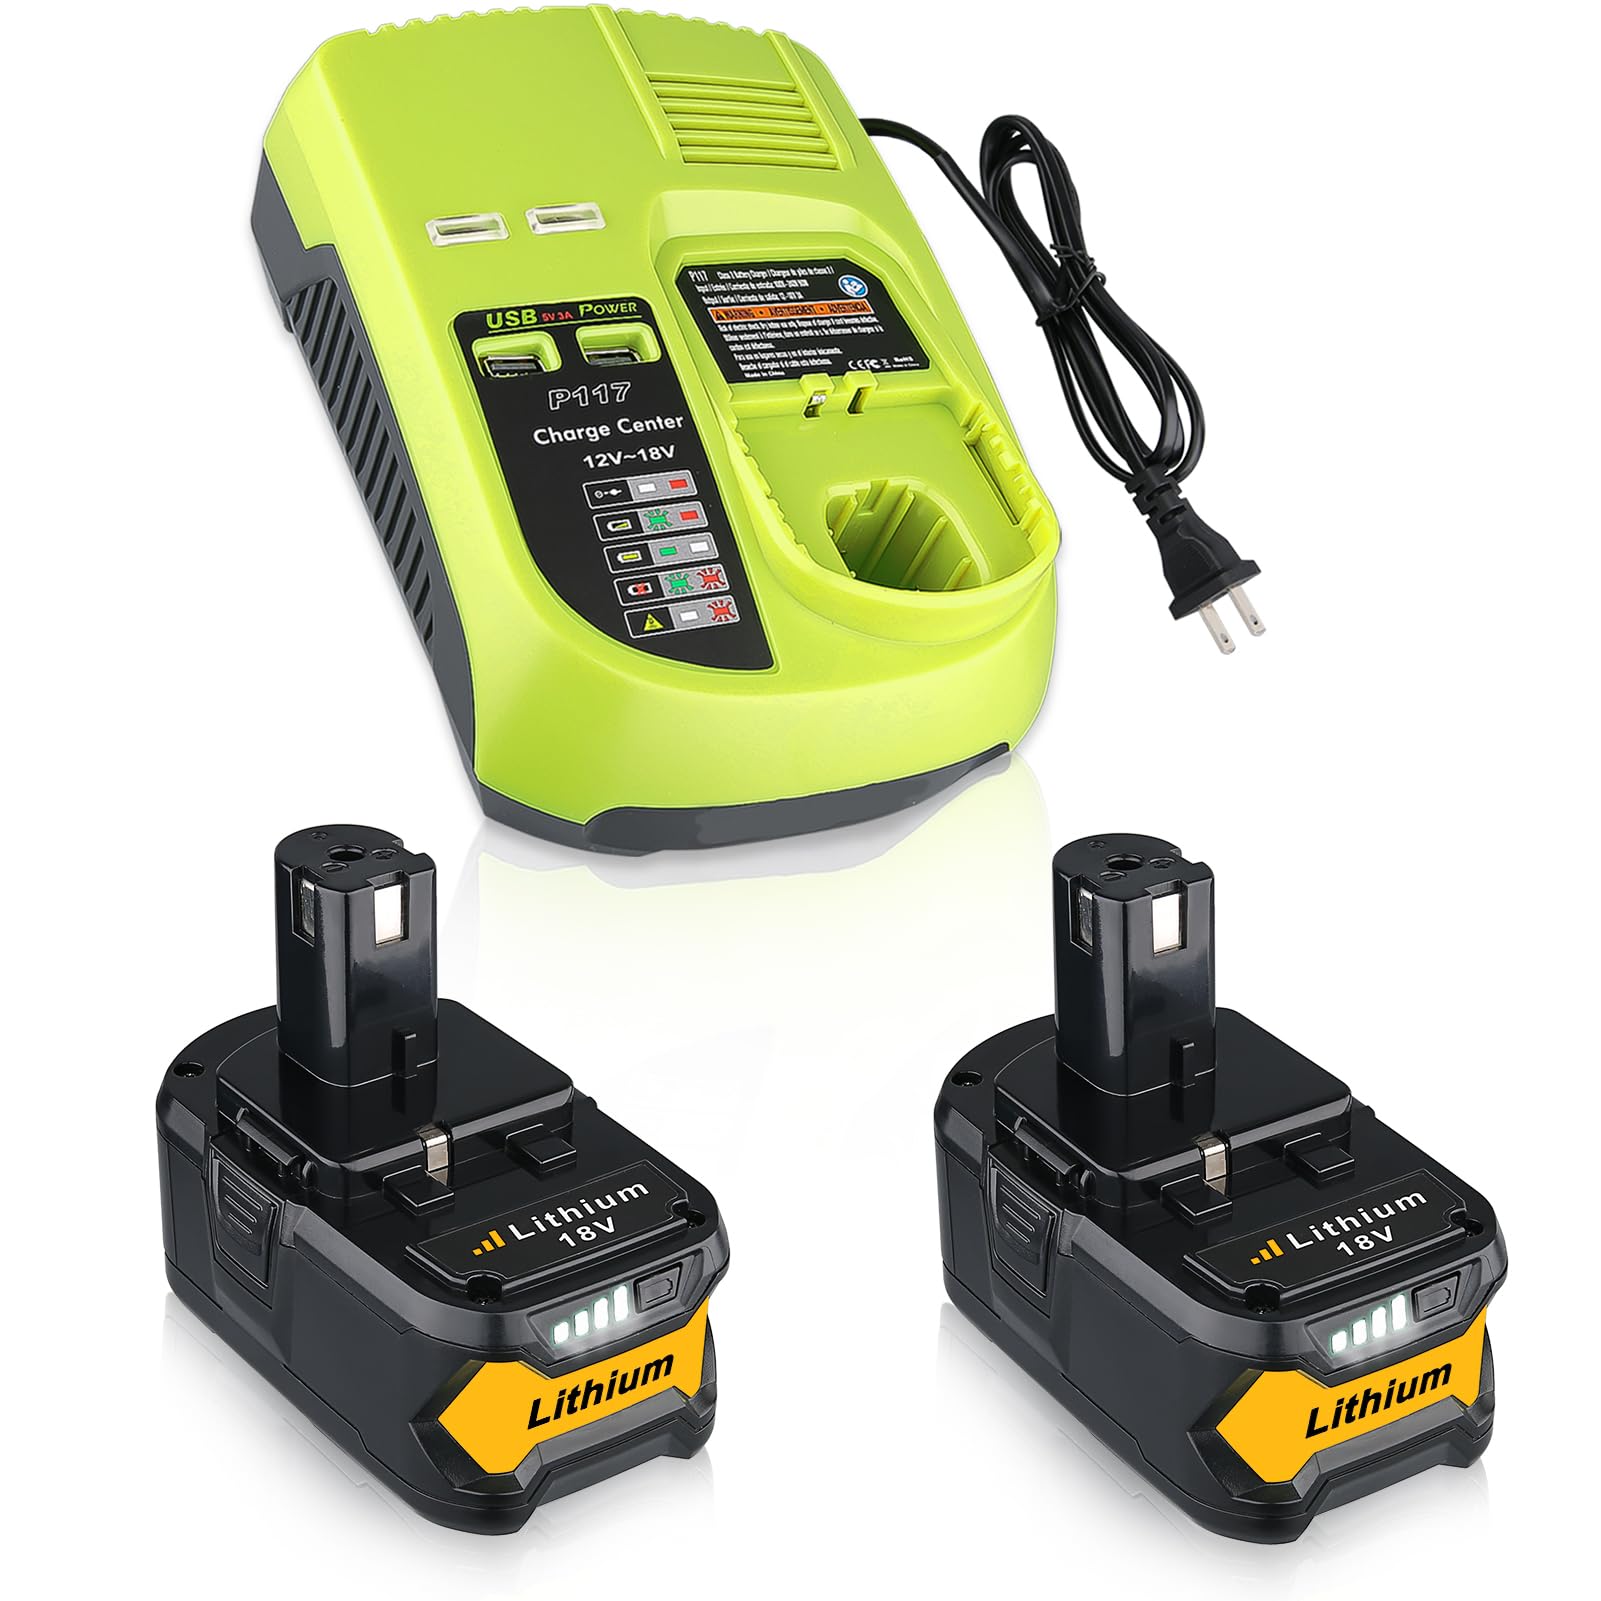 How To Charge Ryobi Battery Without Charger